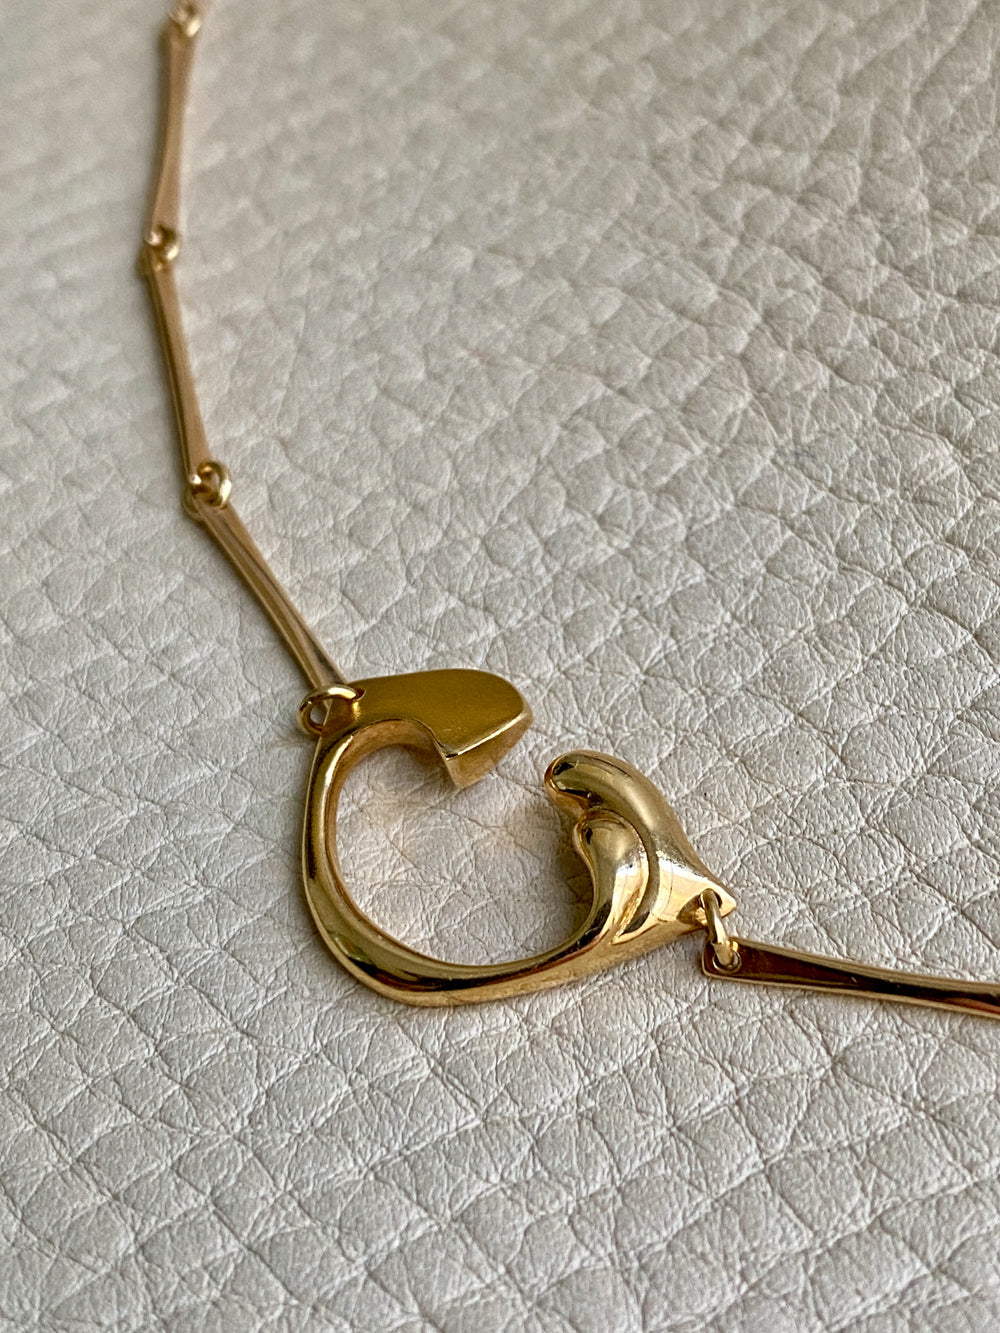 Finnish 18k gold bar link necklace with stylized heart centerpiece - 16.5 inch length